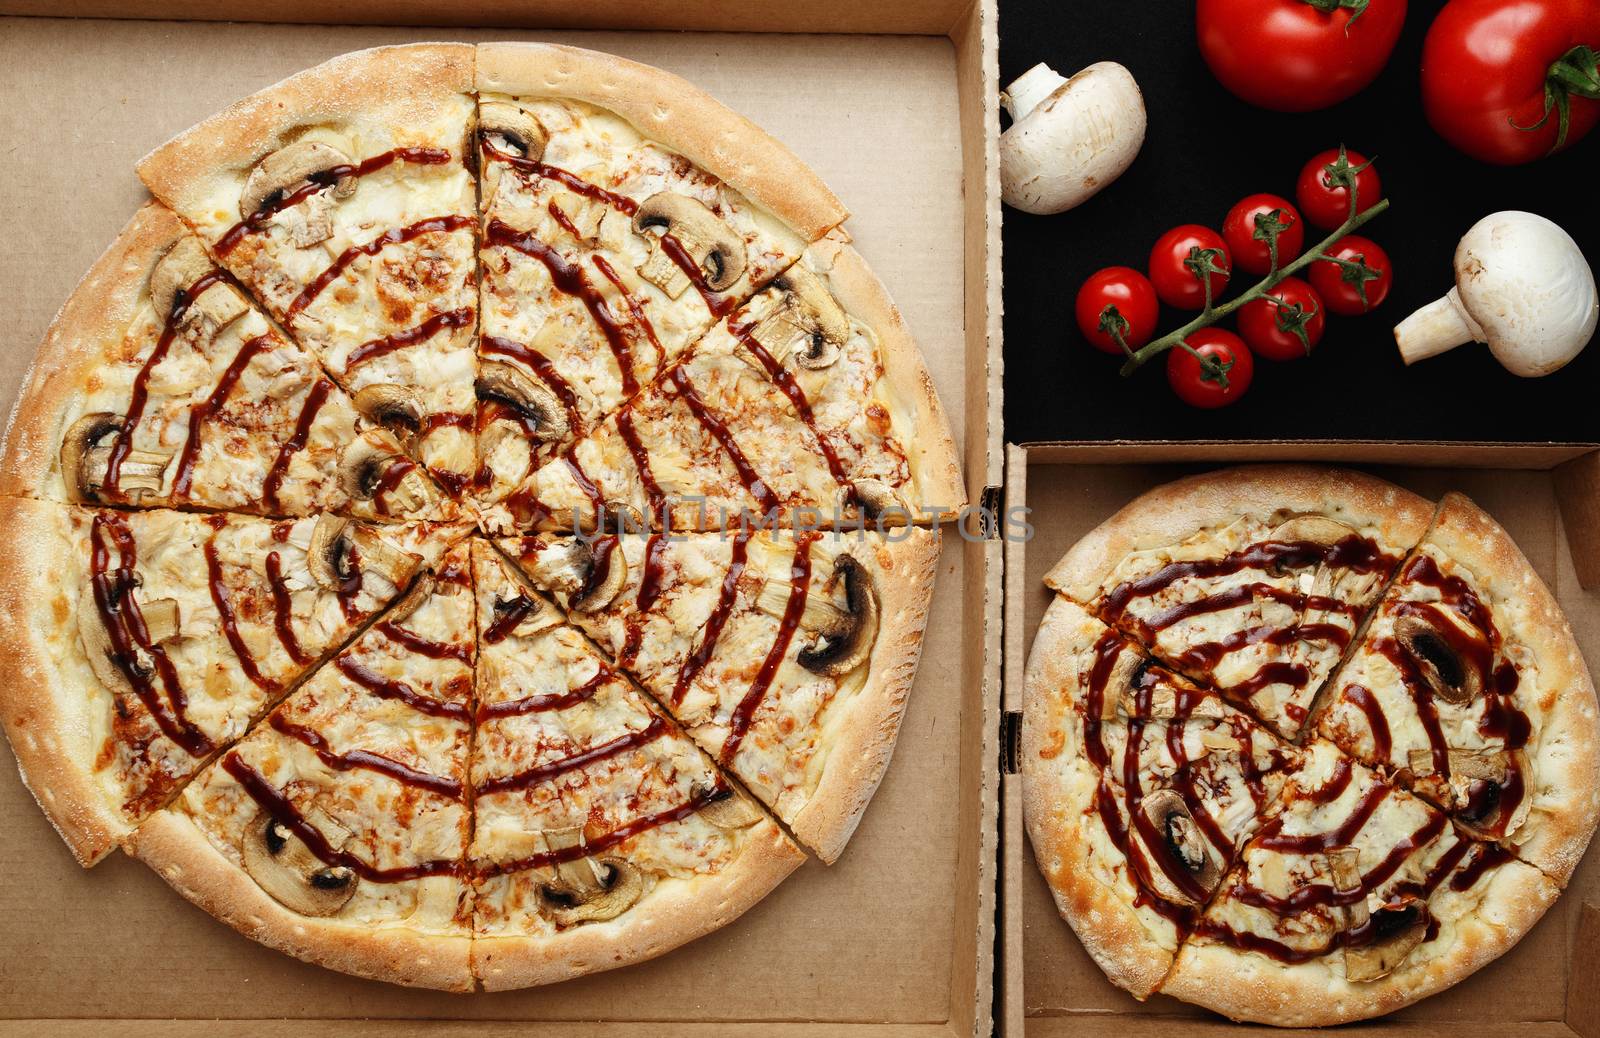 Large and small pizzas lie on an open cardboard box. Next to them are cherry tomatoes and mushroom mushrooms. top view photo